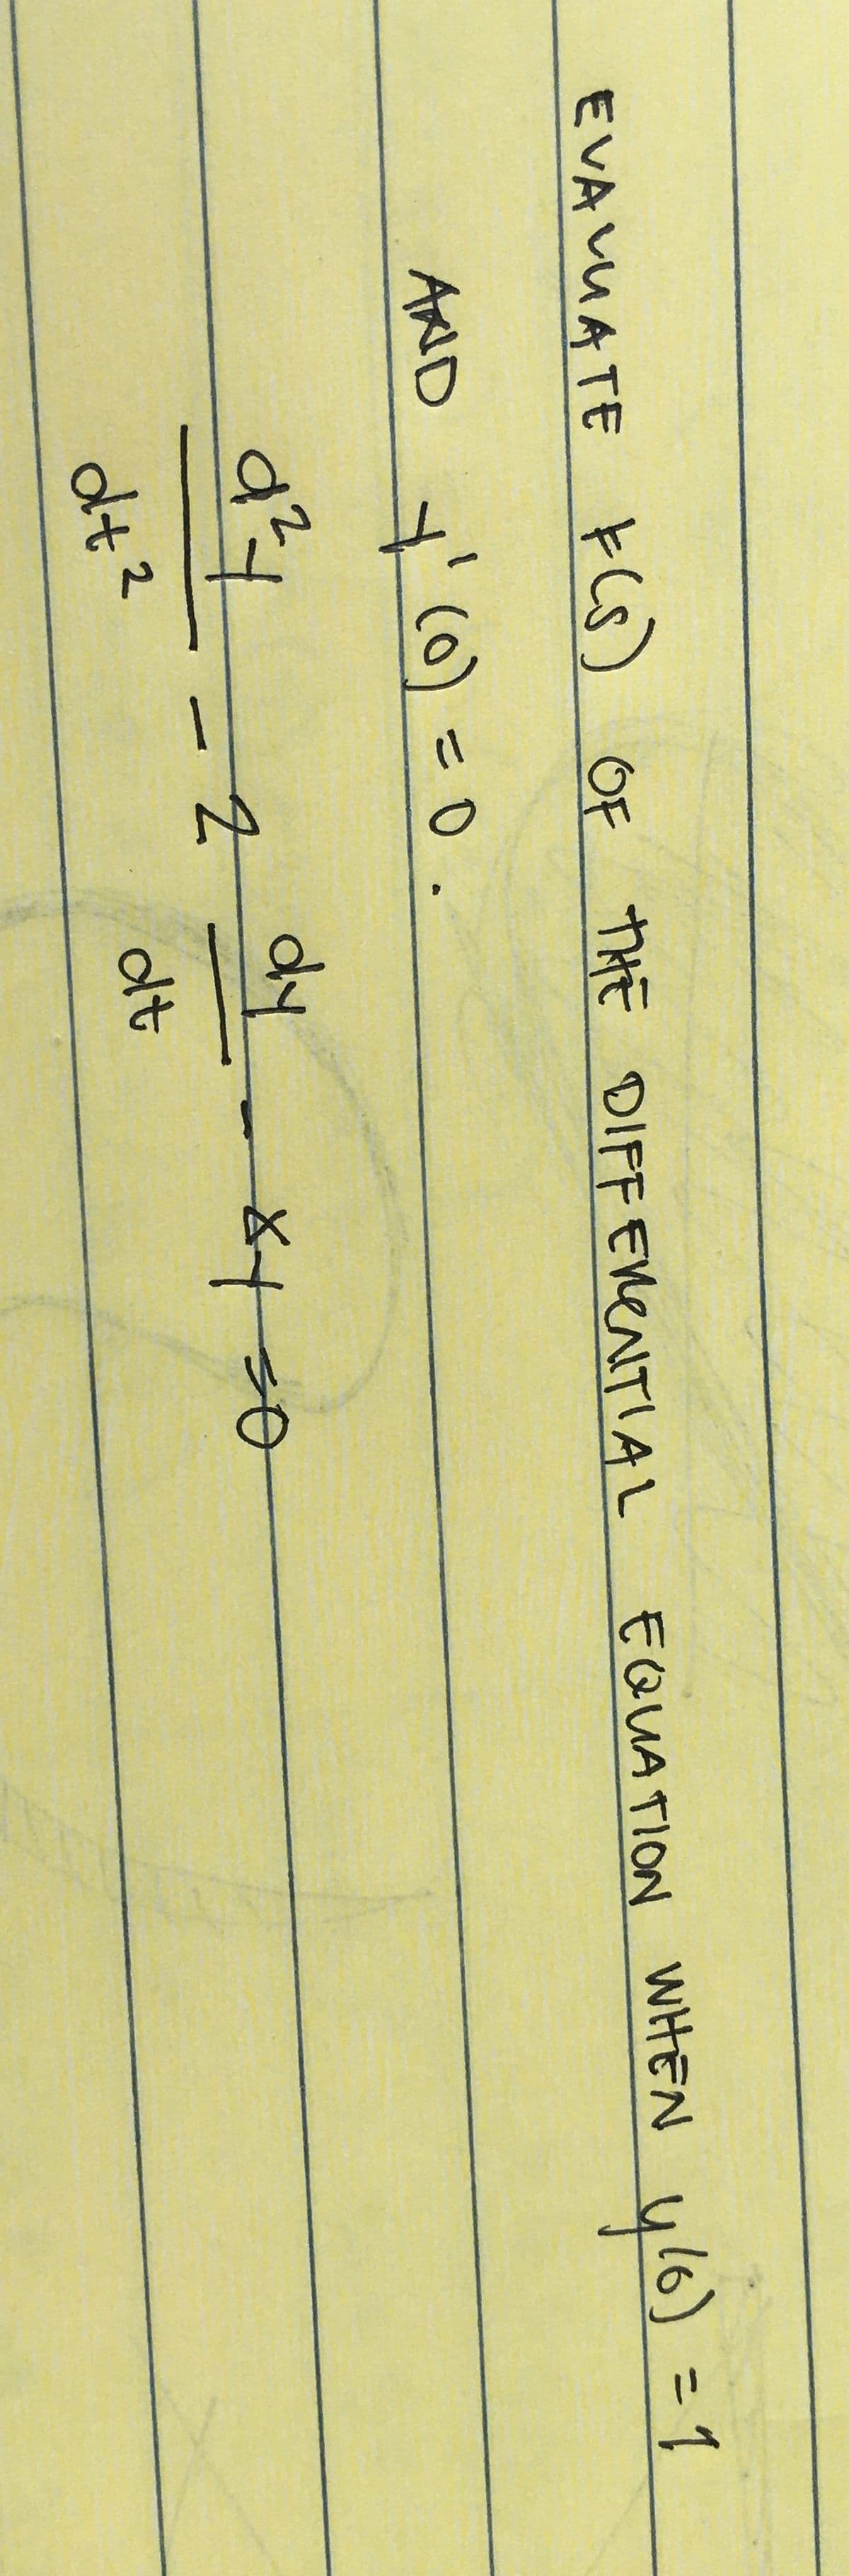 EVA LUATE FCs) OF
THE DIFFENeNTIAL
EQUATION WHEN ul6) =1
y/6)
%3D
AAD ' (0) こ0.
(0) =0.
dy
dt?
dt
